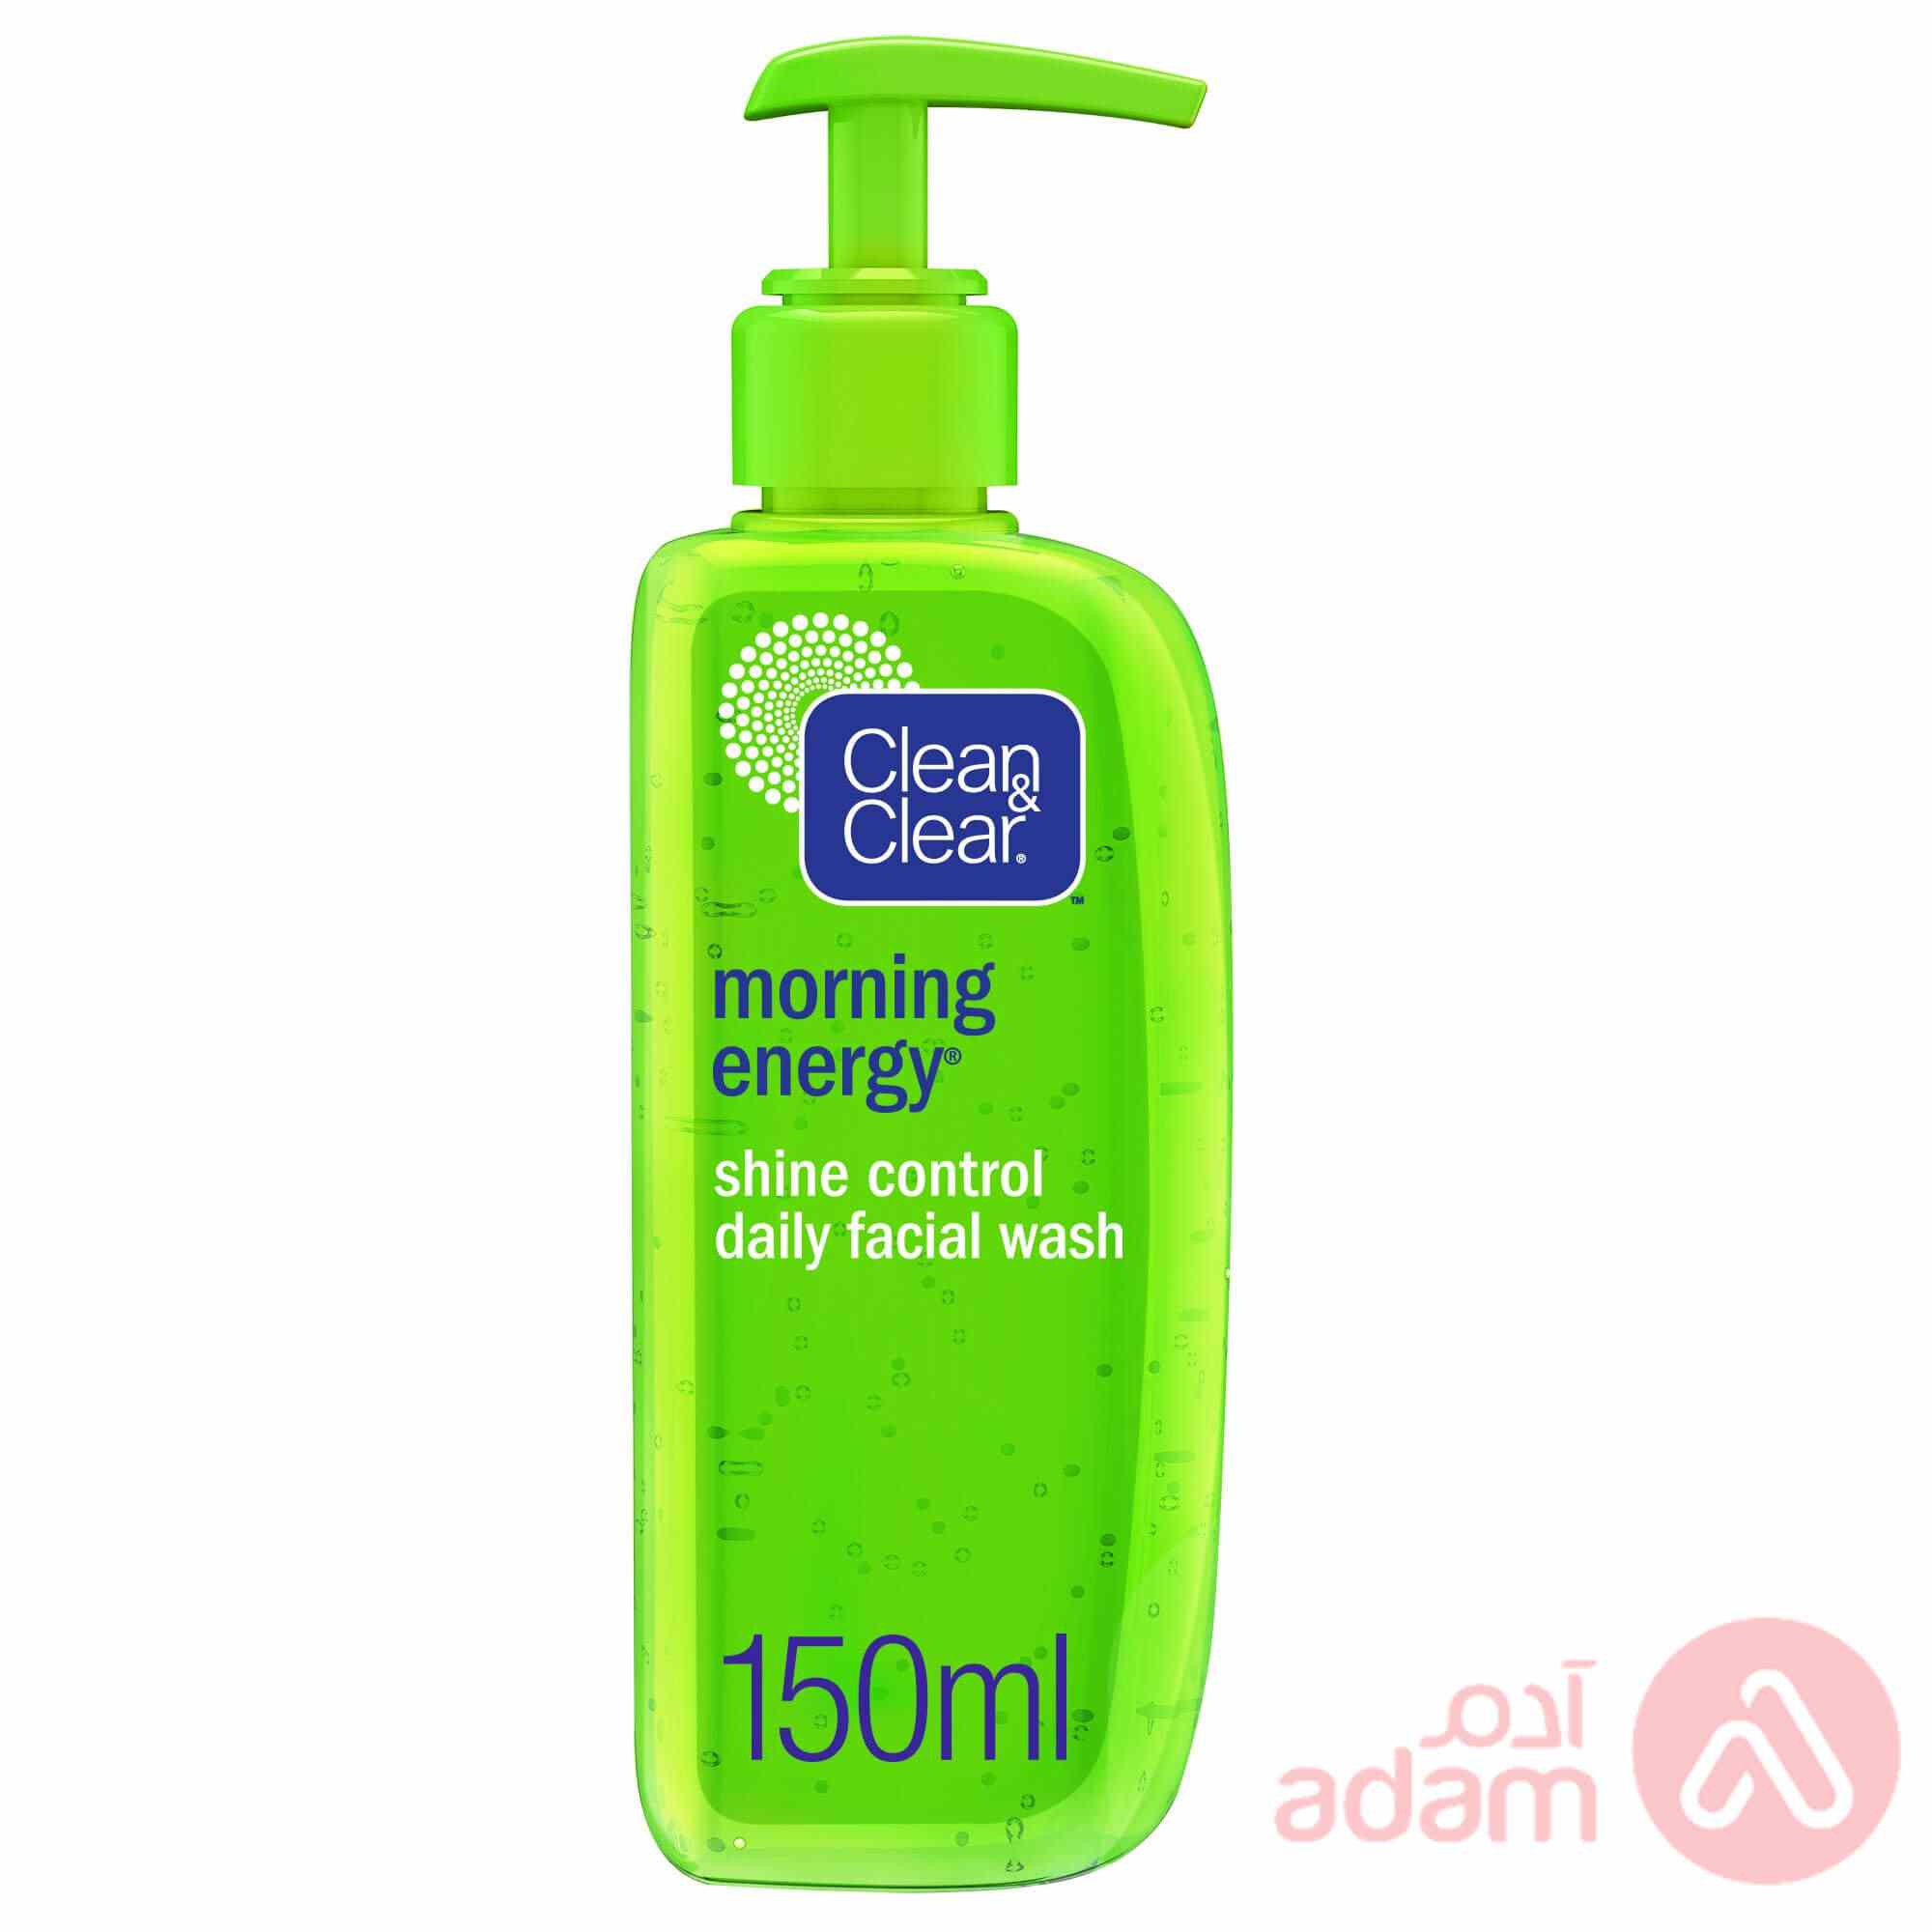 Clean&Clear Morning Energy Shine Control Daily Facial Wash | 150Ml